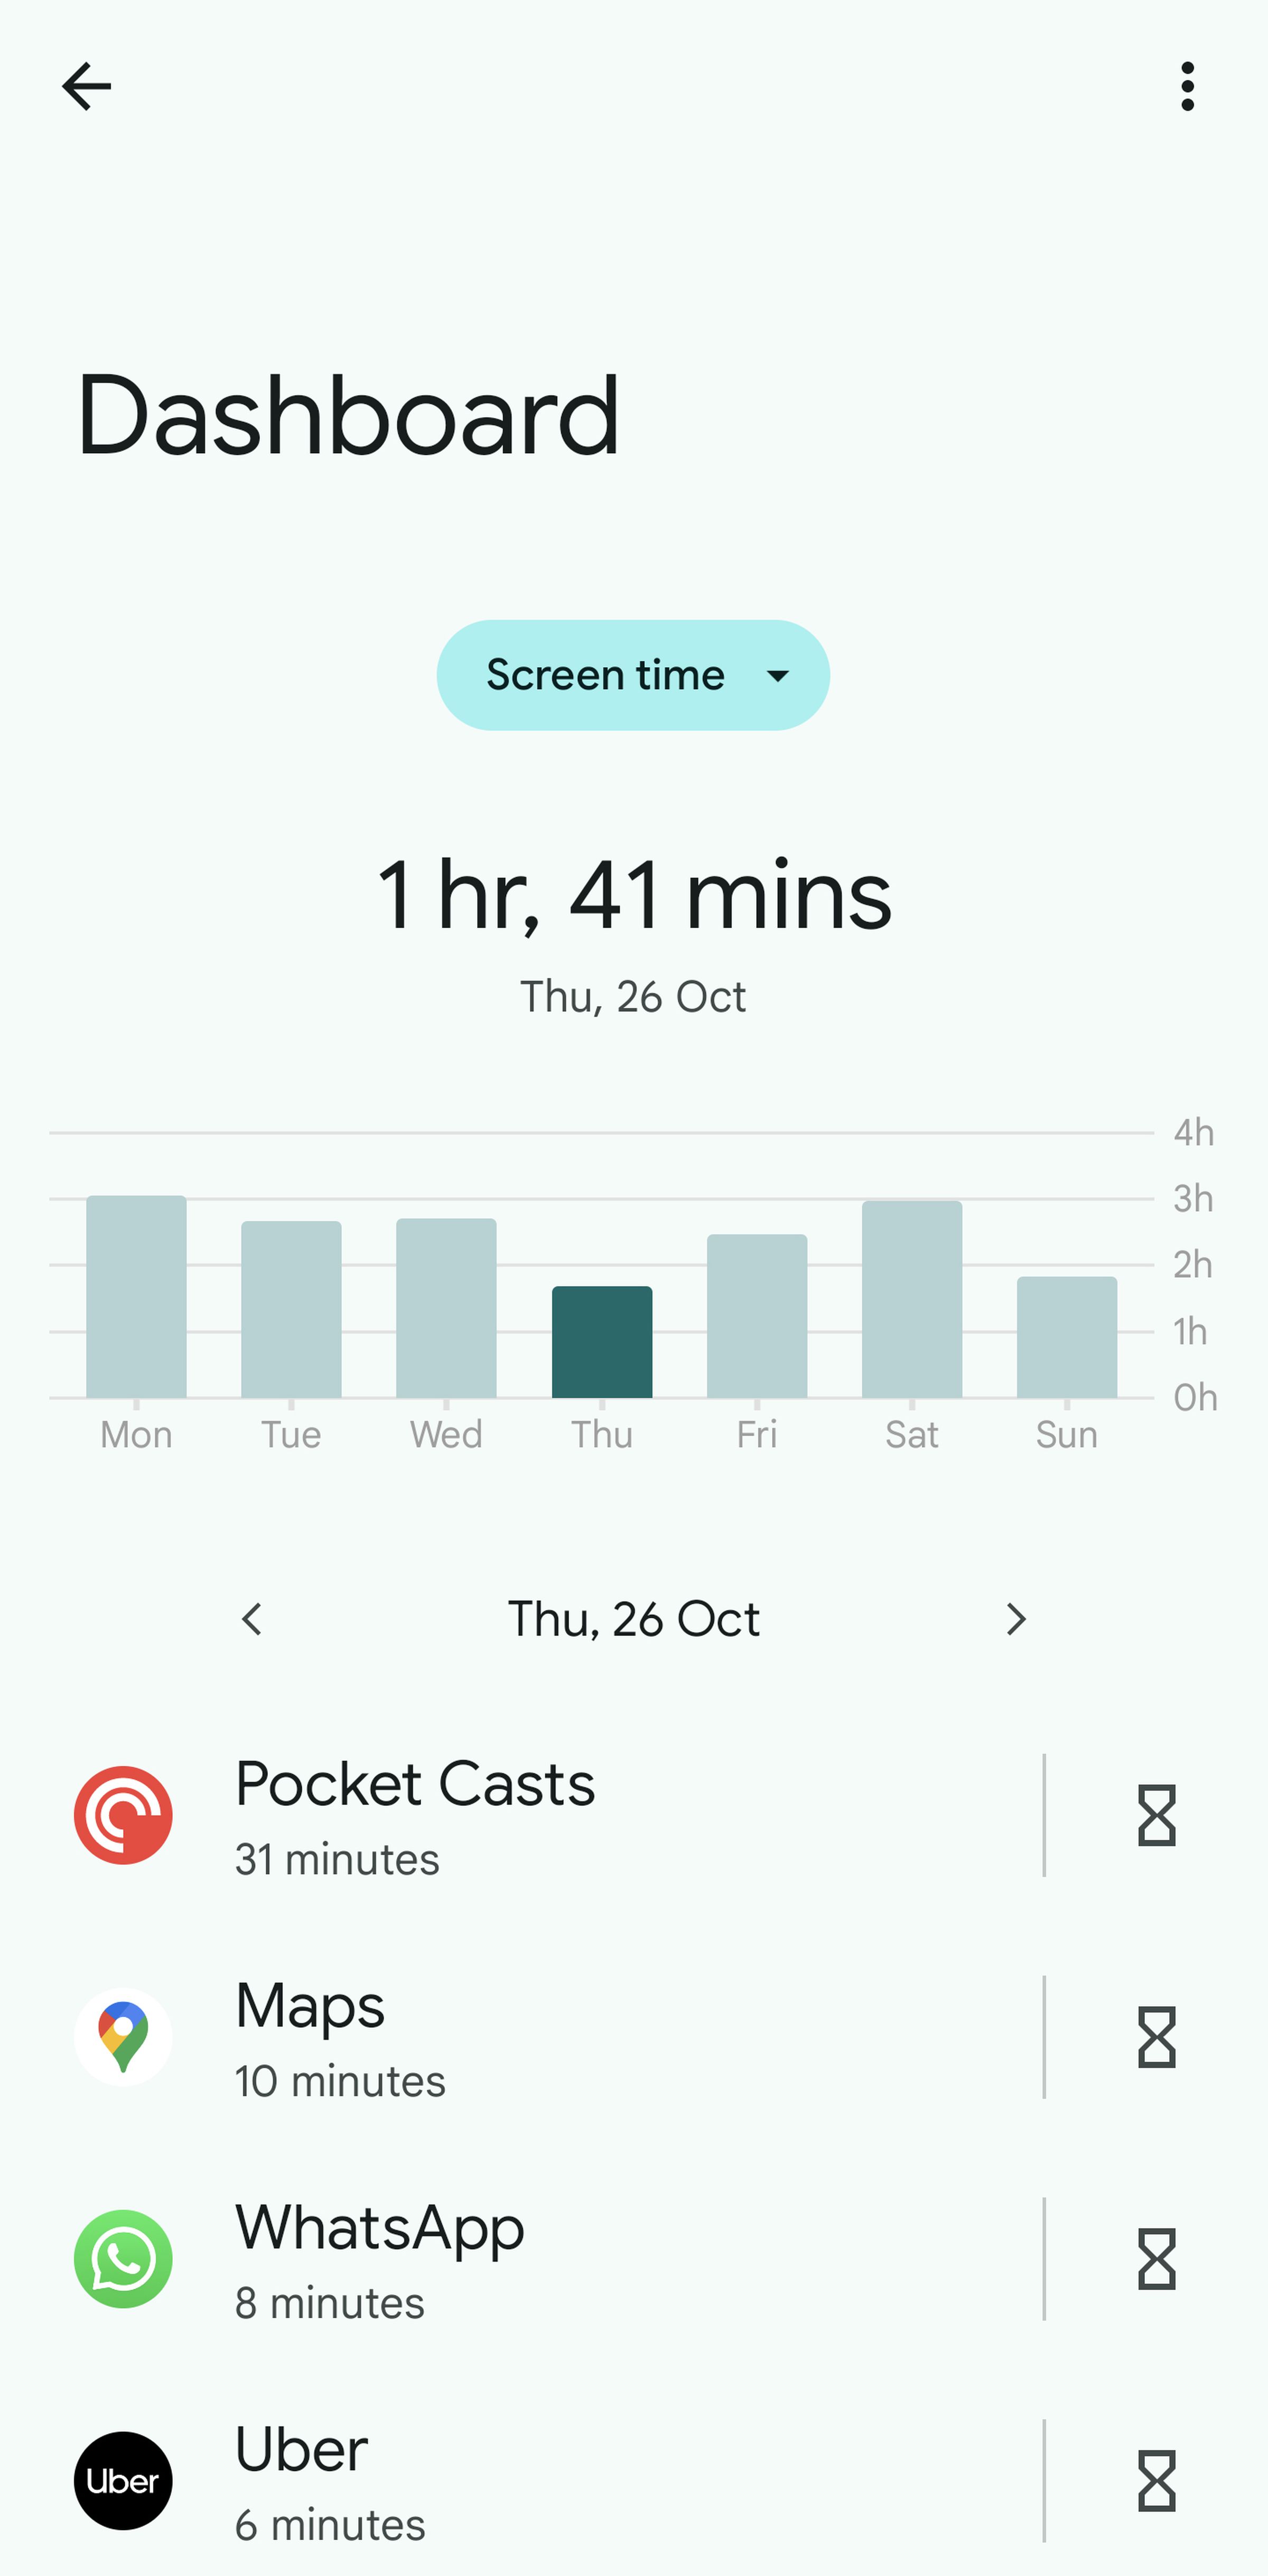 Mobile screen labeled Dashboard, below which is text reading 1 hr, 51 mins, and a bar chart showing the screen time for each day in the week, and a list of apps below that.